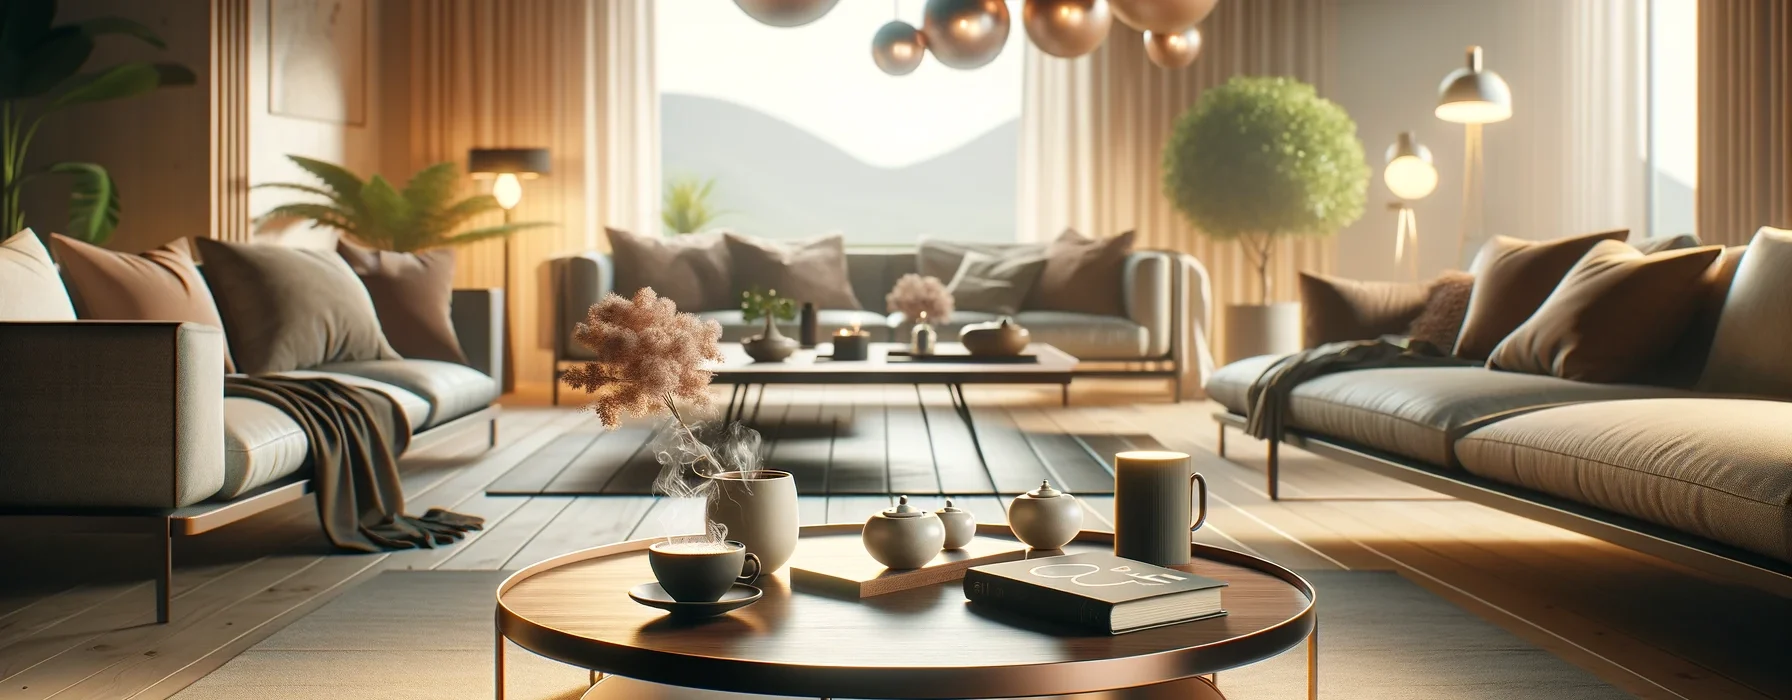 6 Best Coffee Tables To Upgrade Your Coffee Lifestyle ECoffeeFinder.com